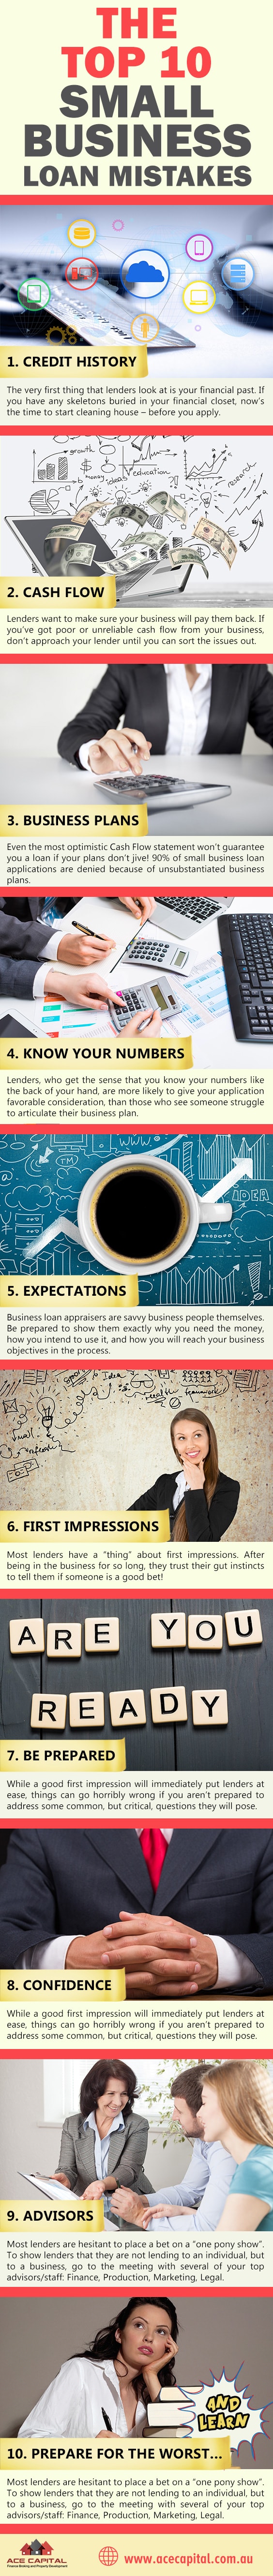 Top 10 Small Business Loan Mistakes